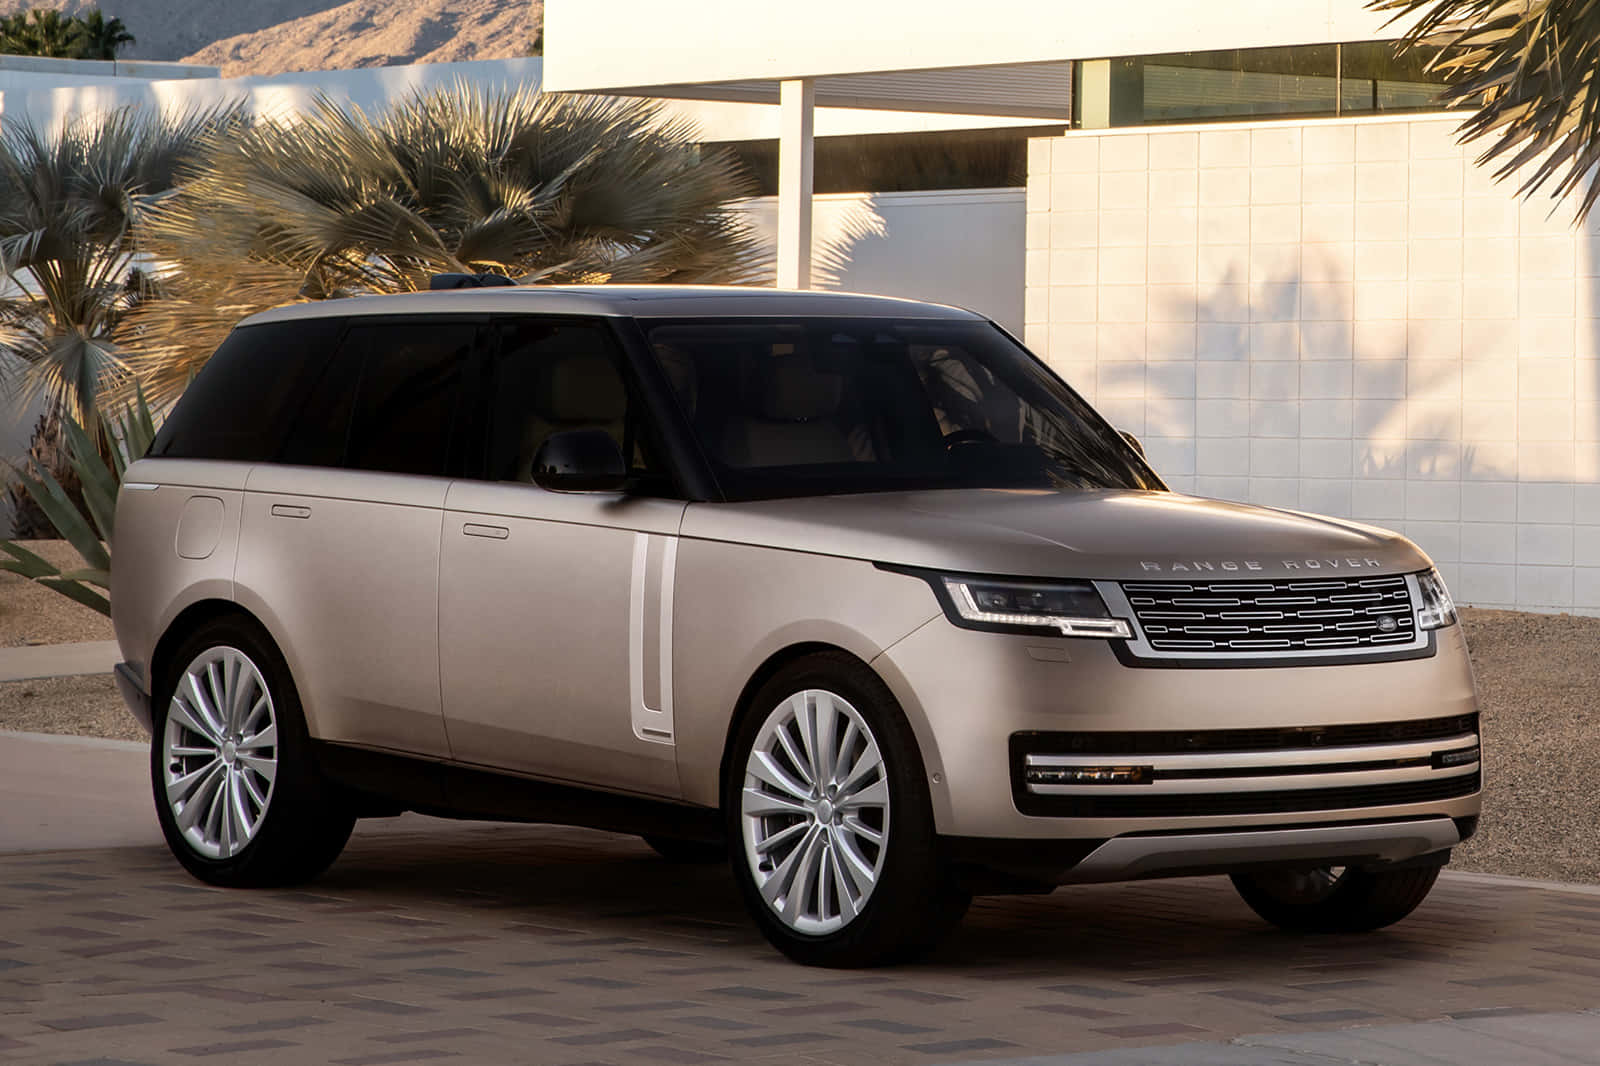 Treat yourself to the luxury of a Range Rover